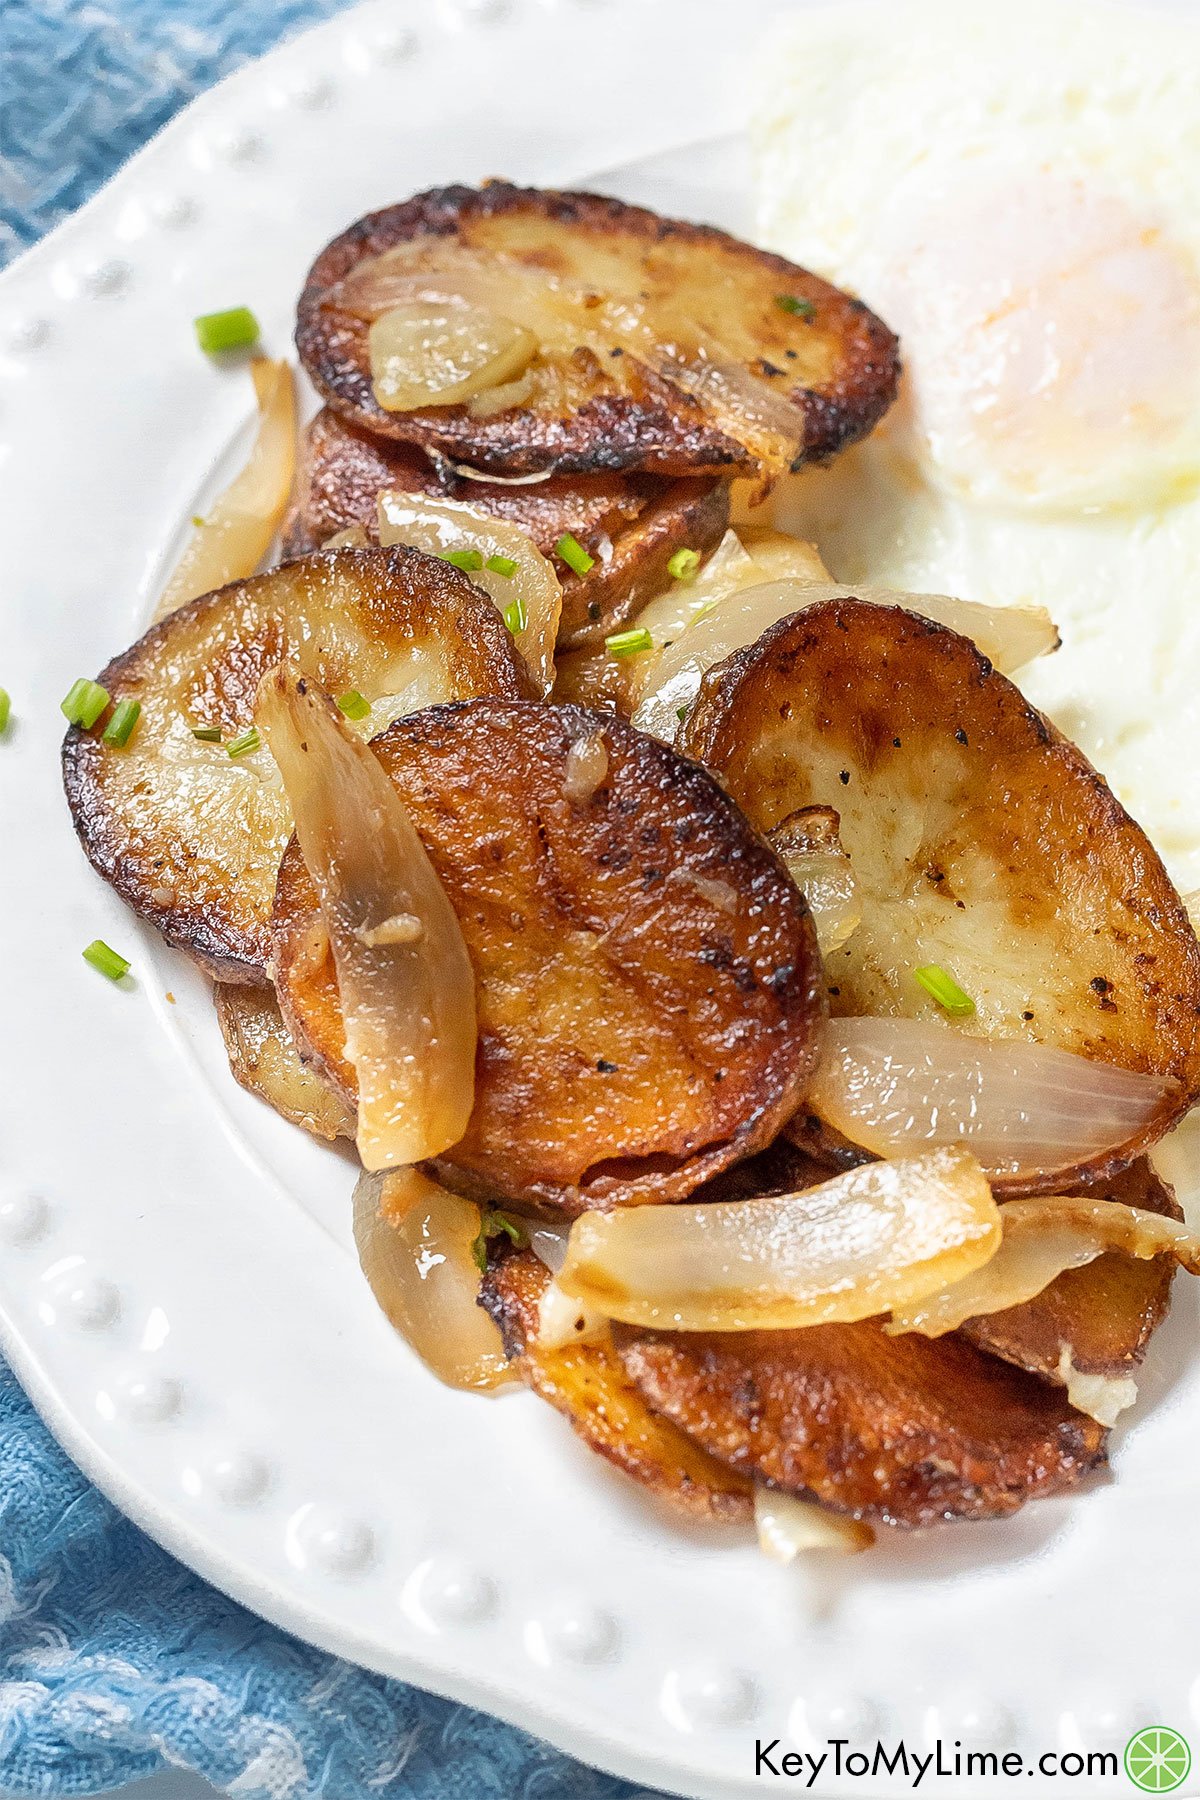 A close up image of fried potatoes and onions with an egg on a white plate.